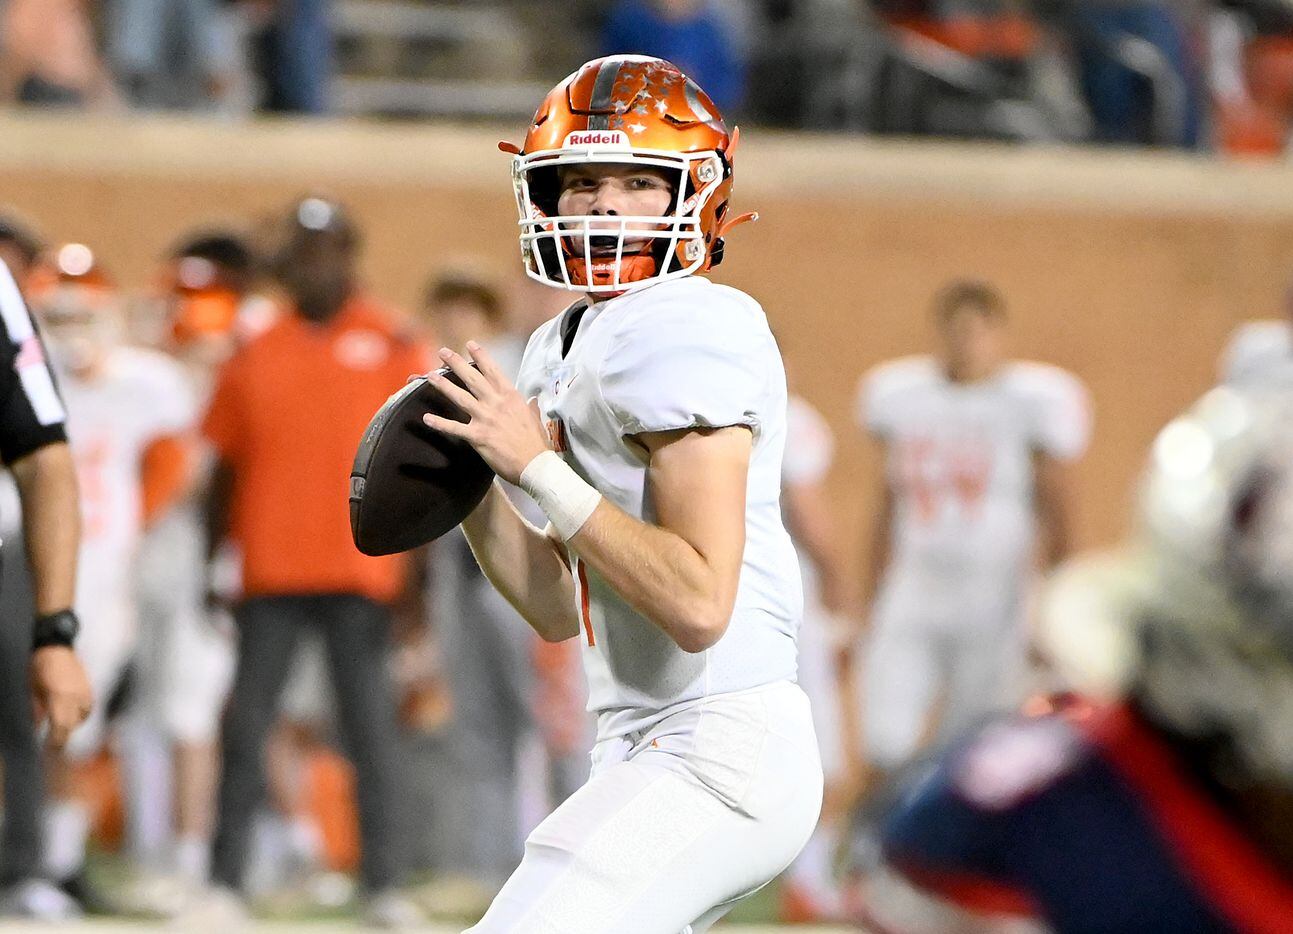 Celina's Noah Bentley (1) looks to pass in the second half of a Class 4A Division II Region I final high school playoff football game between Aubrey and Celina, Friday, Dec. 3, 2021, in Denton, Texas. Celina won 34-0. (Matt Strasen/Special Contributor)